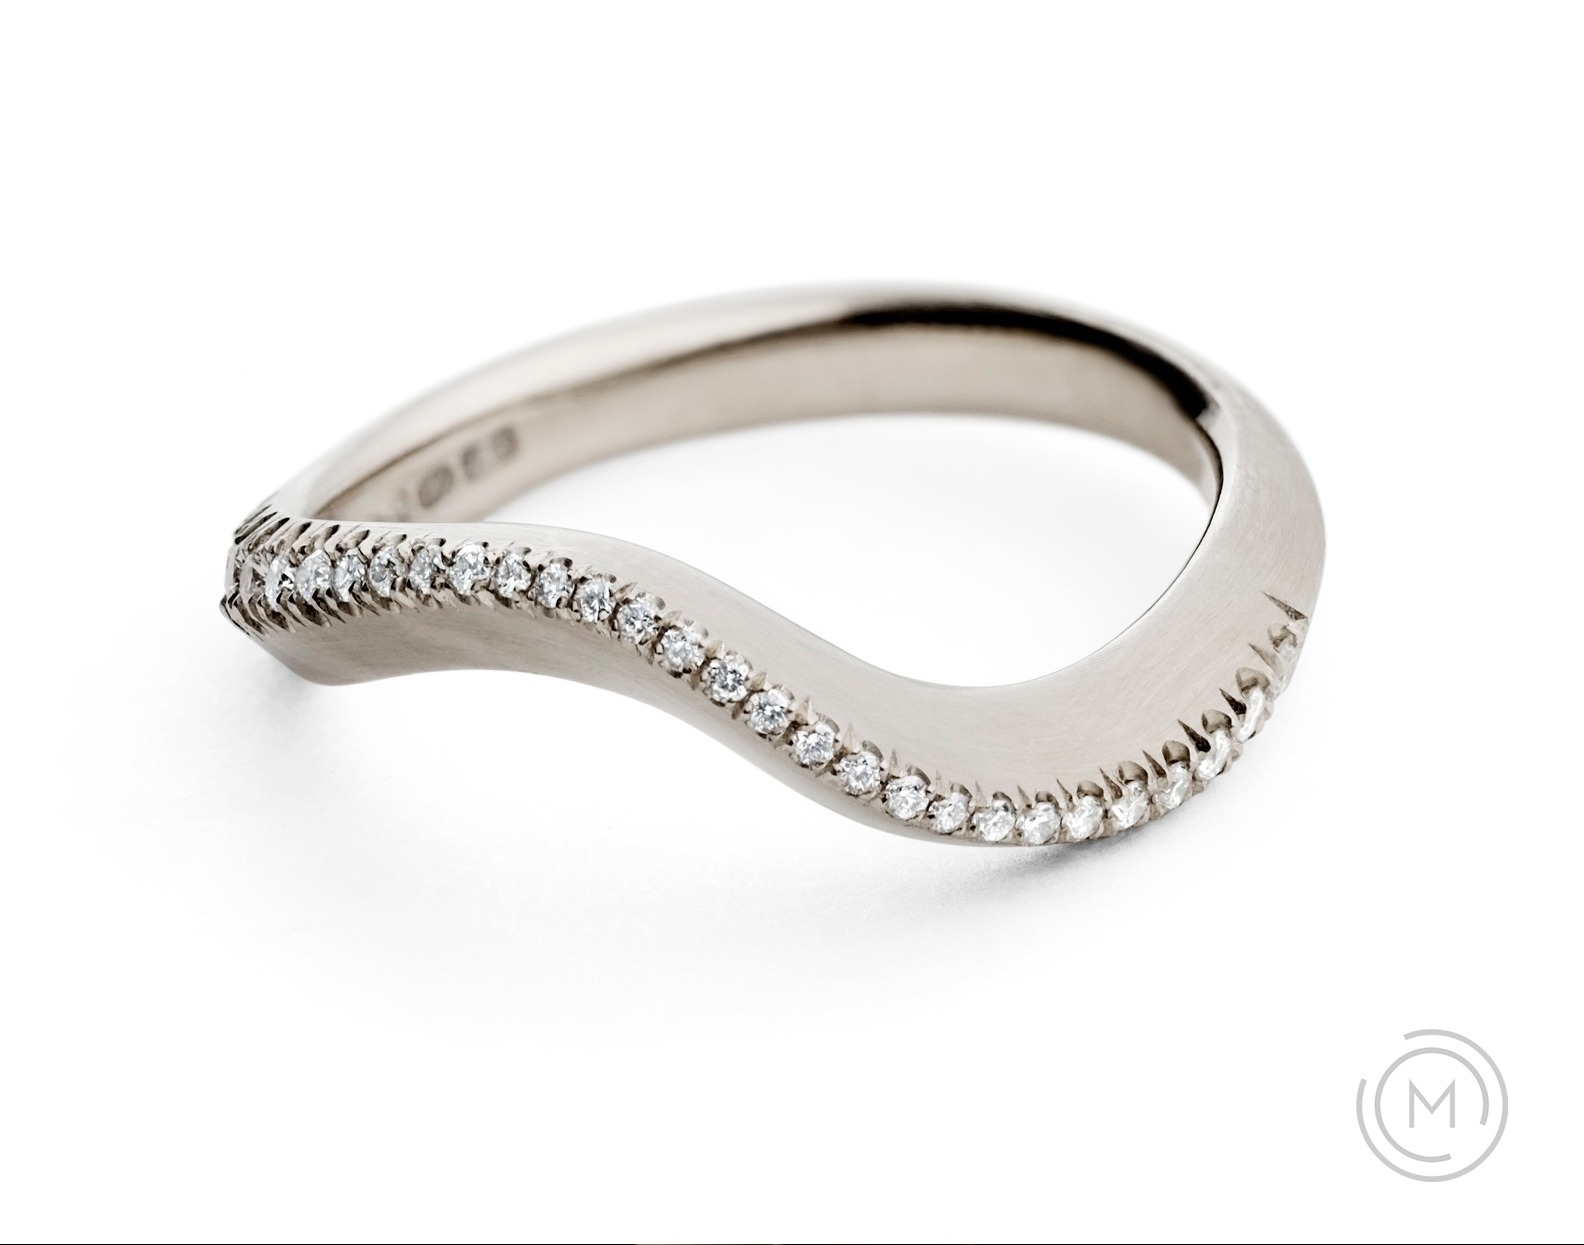 Hand-carved white gold Arris ring with pave diamonds